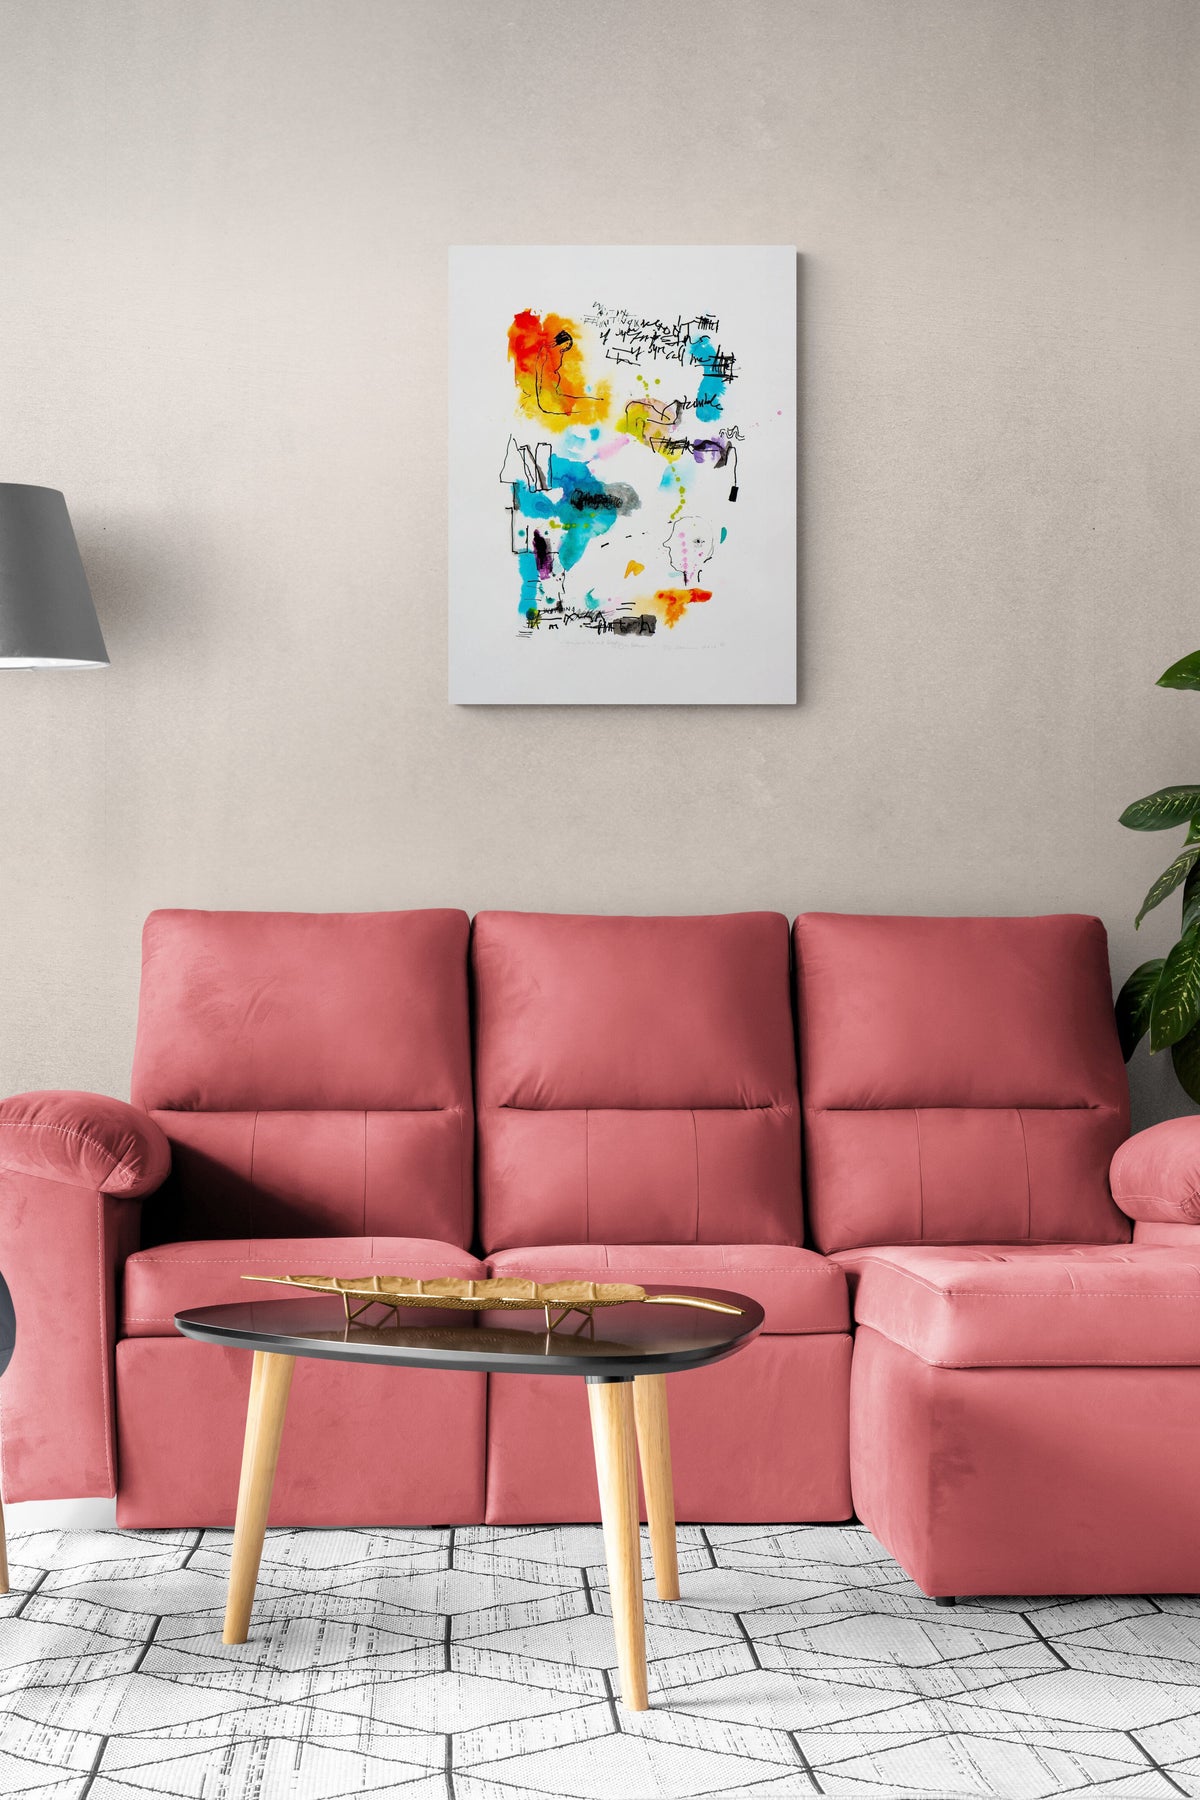 Expressive Painting adds color & conversation to this modern cozy family room